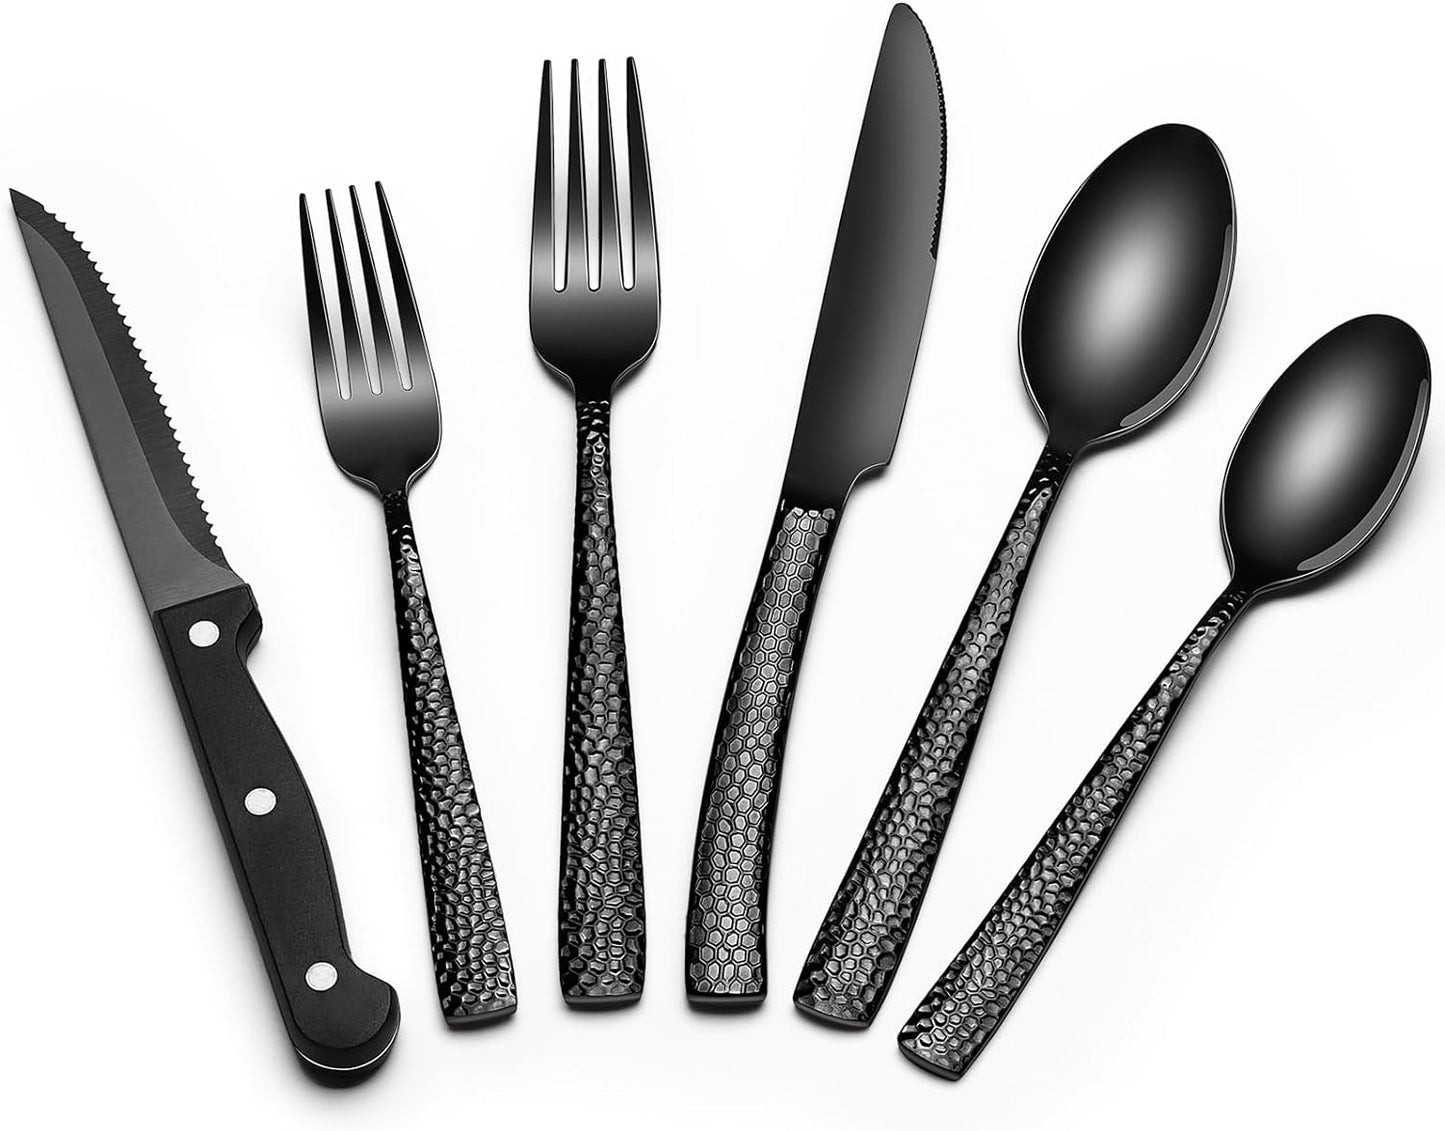 24-Piece Black Silverware Set with Steak Knives, Black Flatware Set for 4, Food-Grade Stainless Steel Tableware Cutlery Set, Mirror Finished Utensil Sets for Home Restaurant